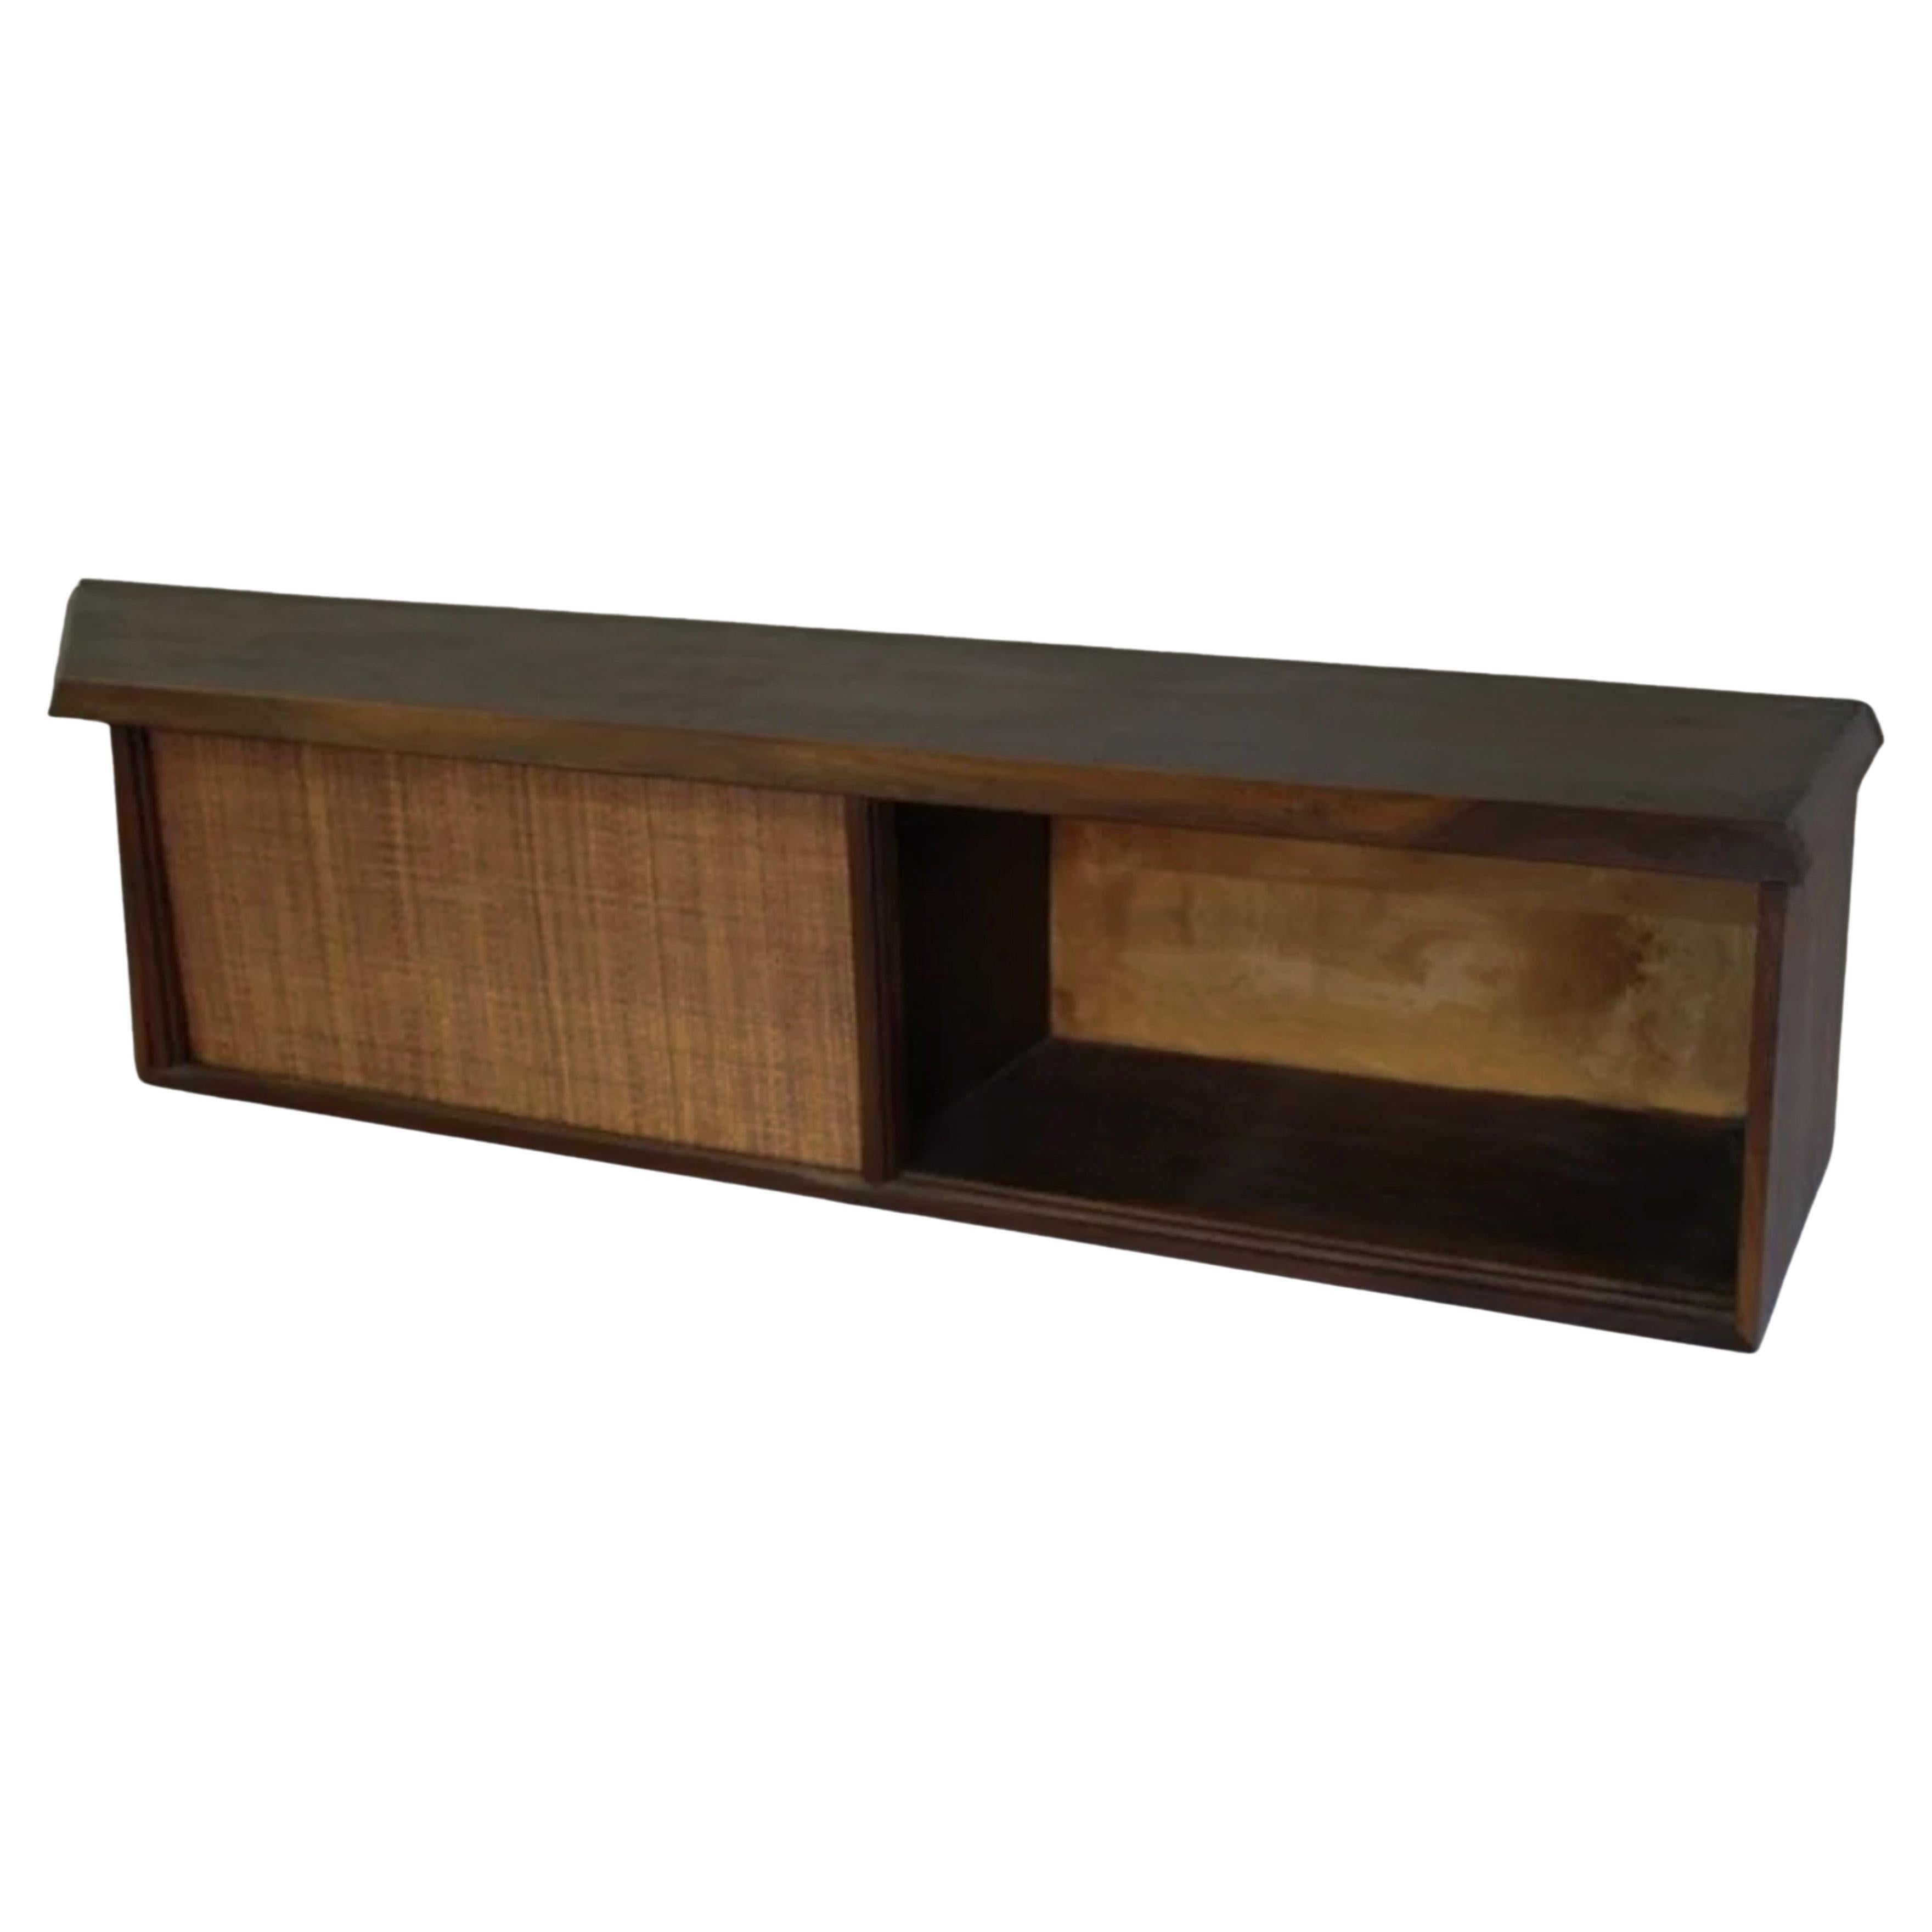 Mid Century George Nakashima Style Wall Mounted floating credenza or shelf with 2 grass cloth front sliding doors. Beautiful black walnut wood with 2 interior sections. Great edition to any modern designed organic home interior. Made in USA. Located